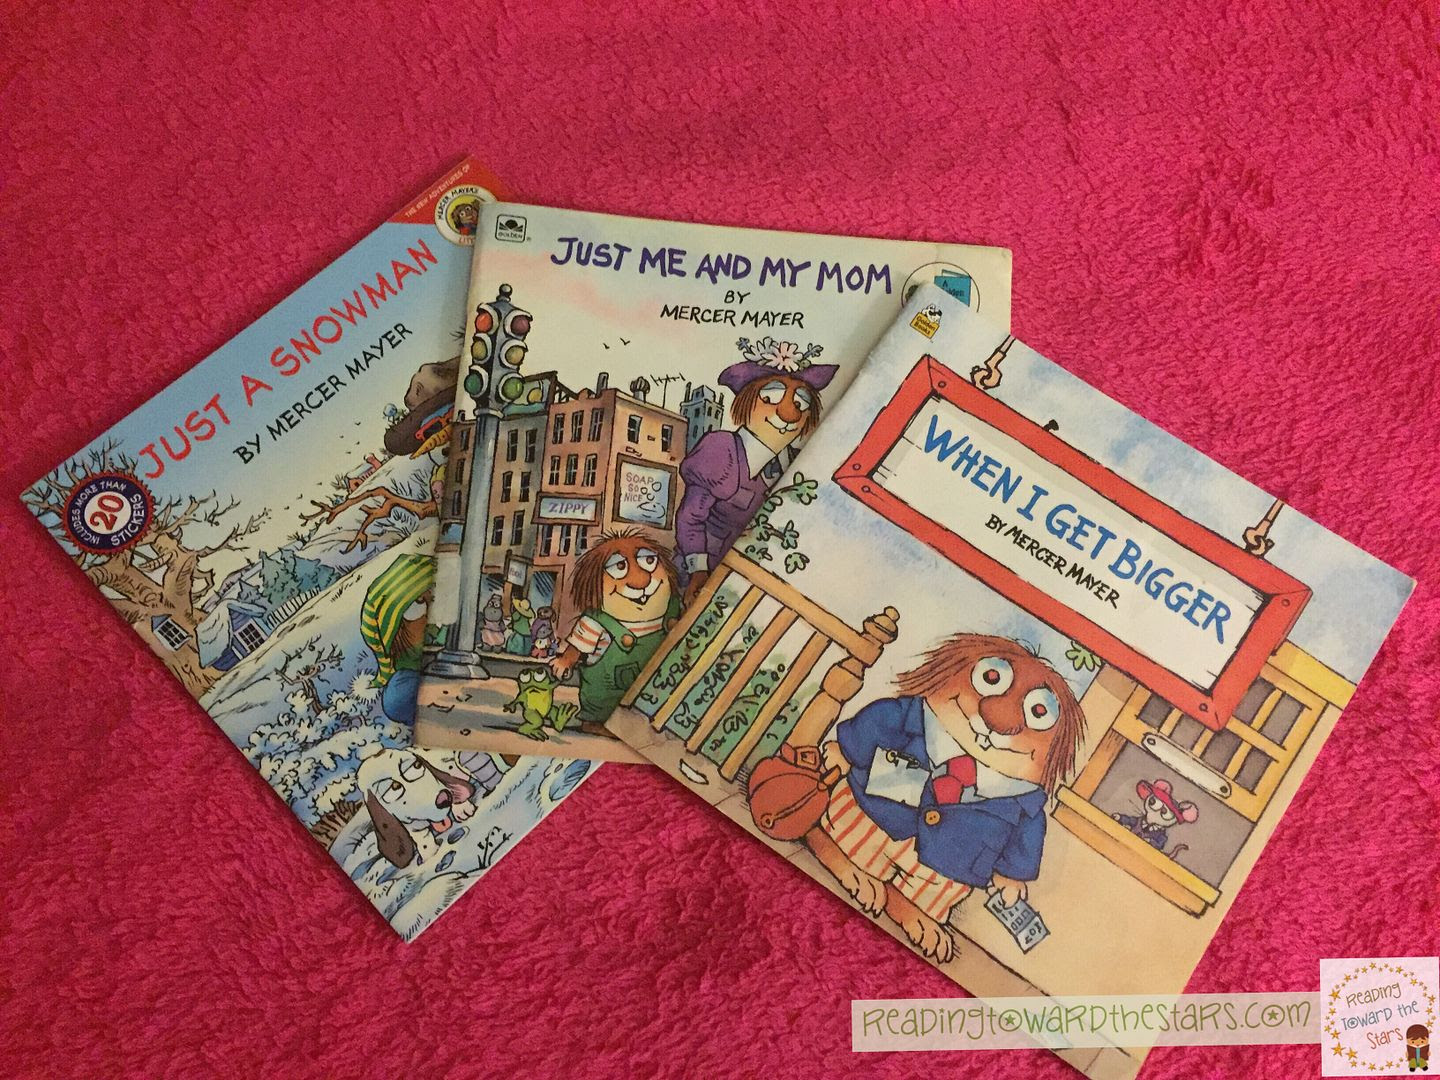 Mercer Mayer books are a childhood favorite. They are also perfect for teaching children important life lessons.